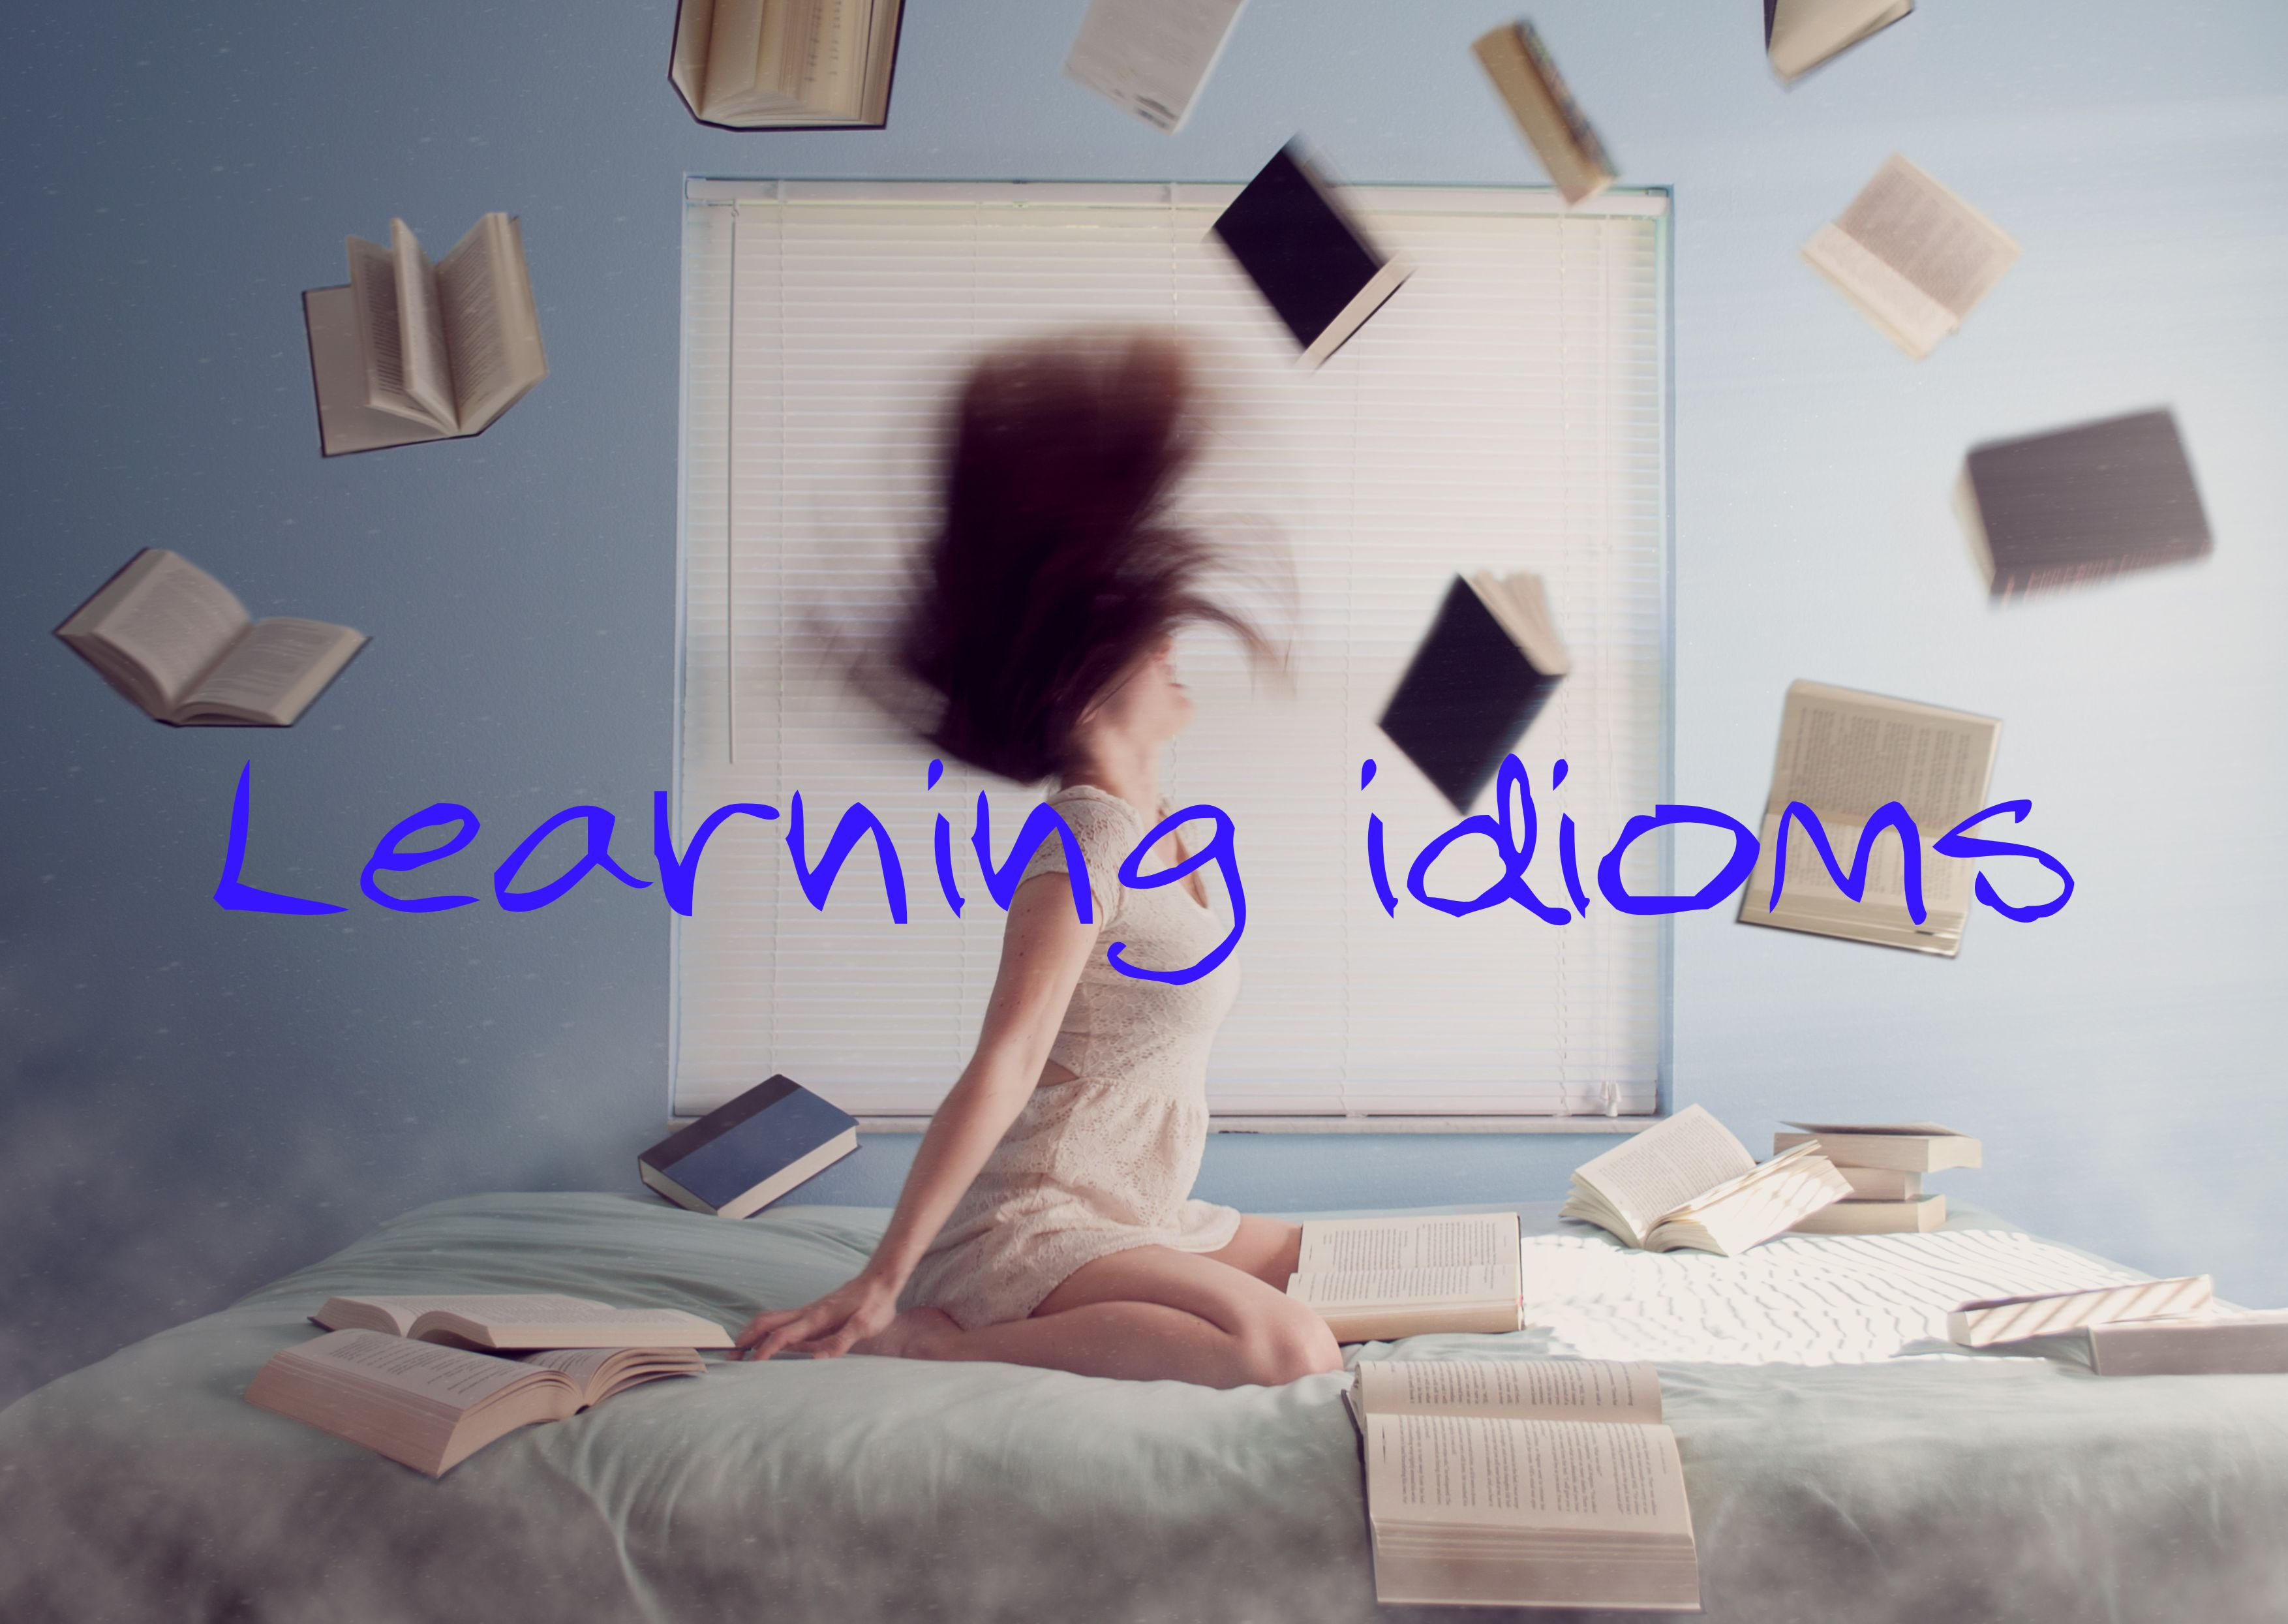 Learning idioms